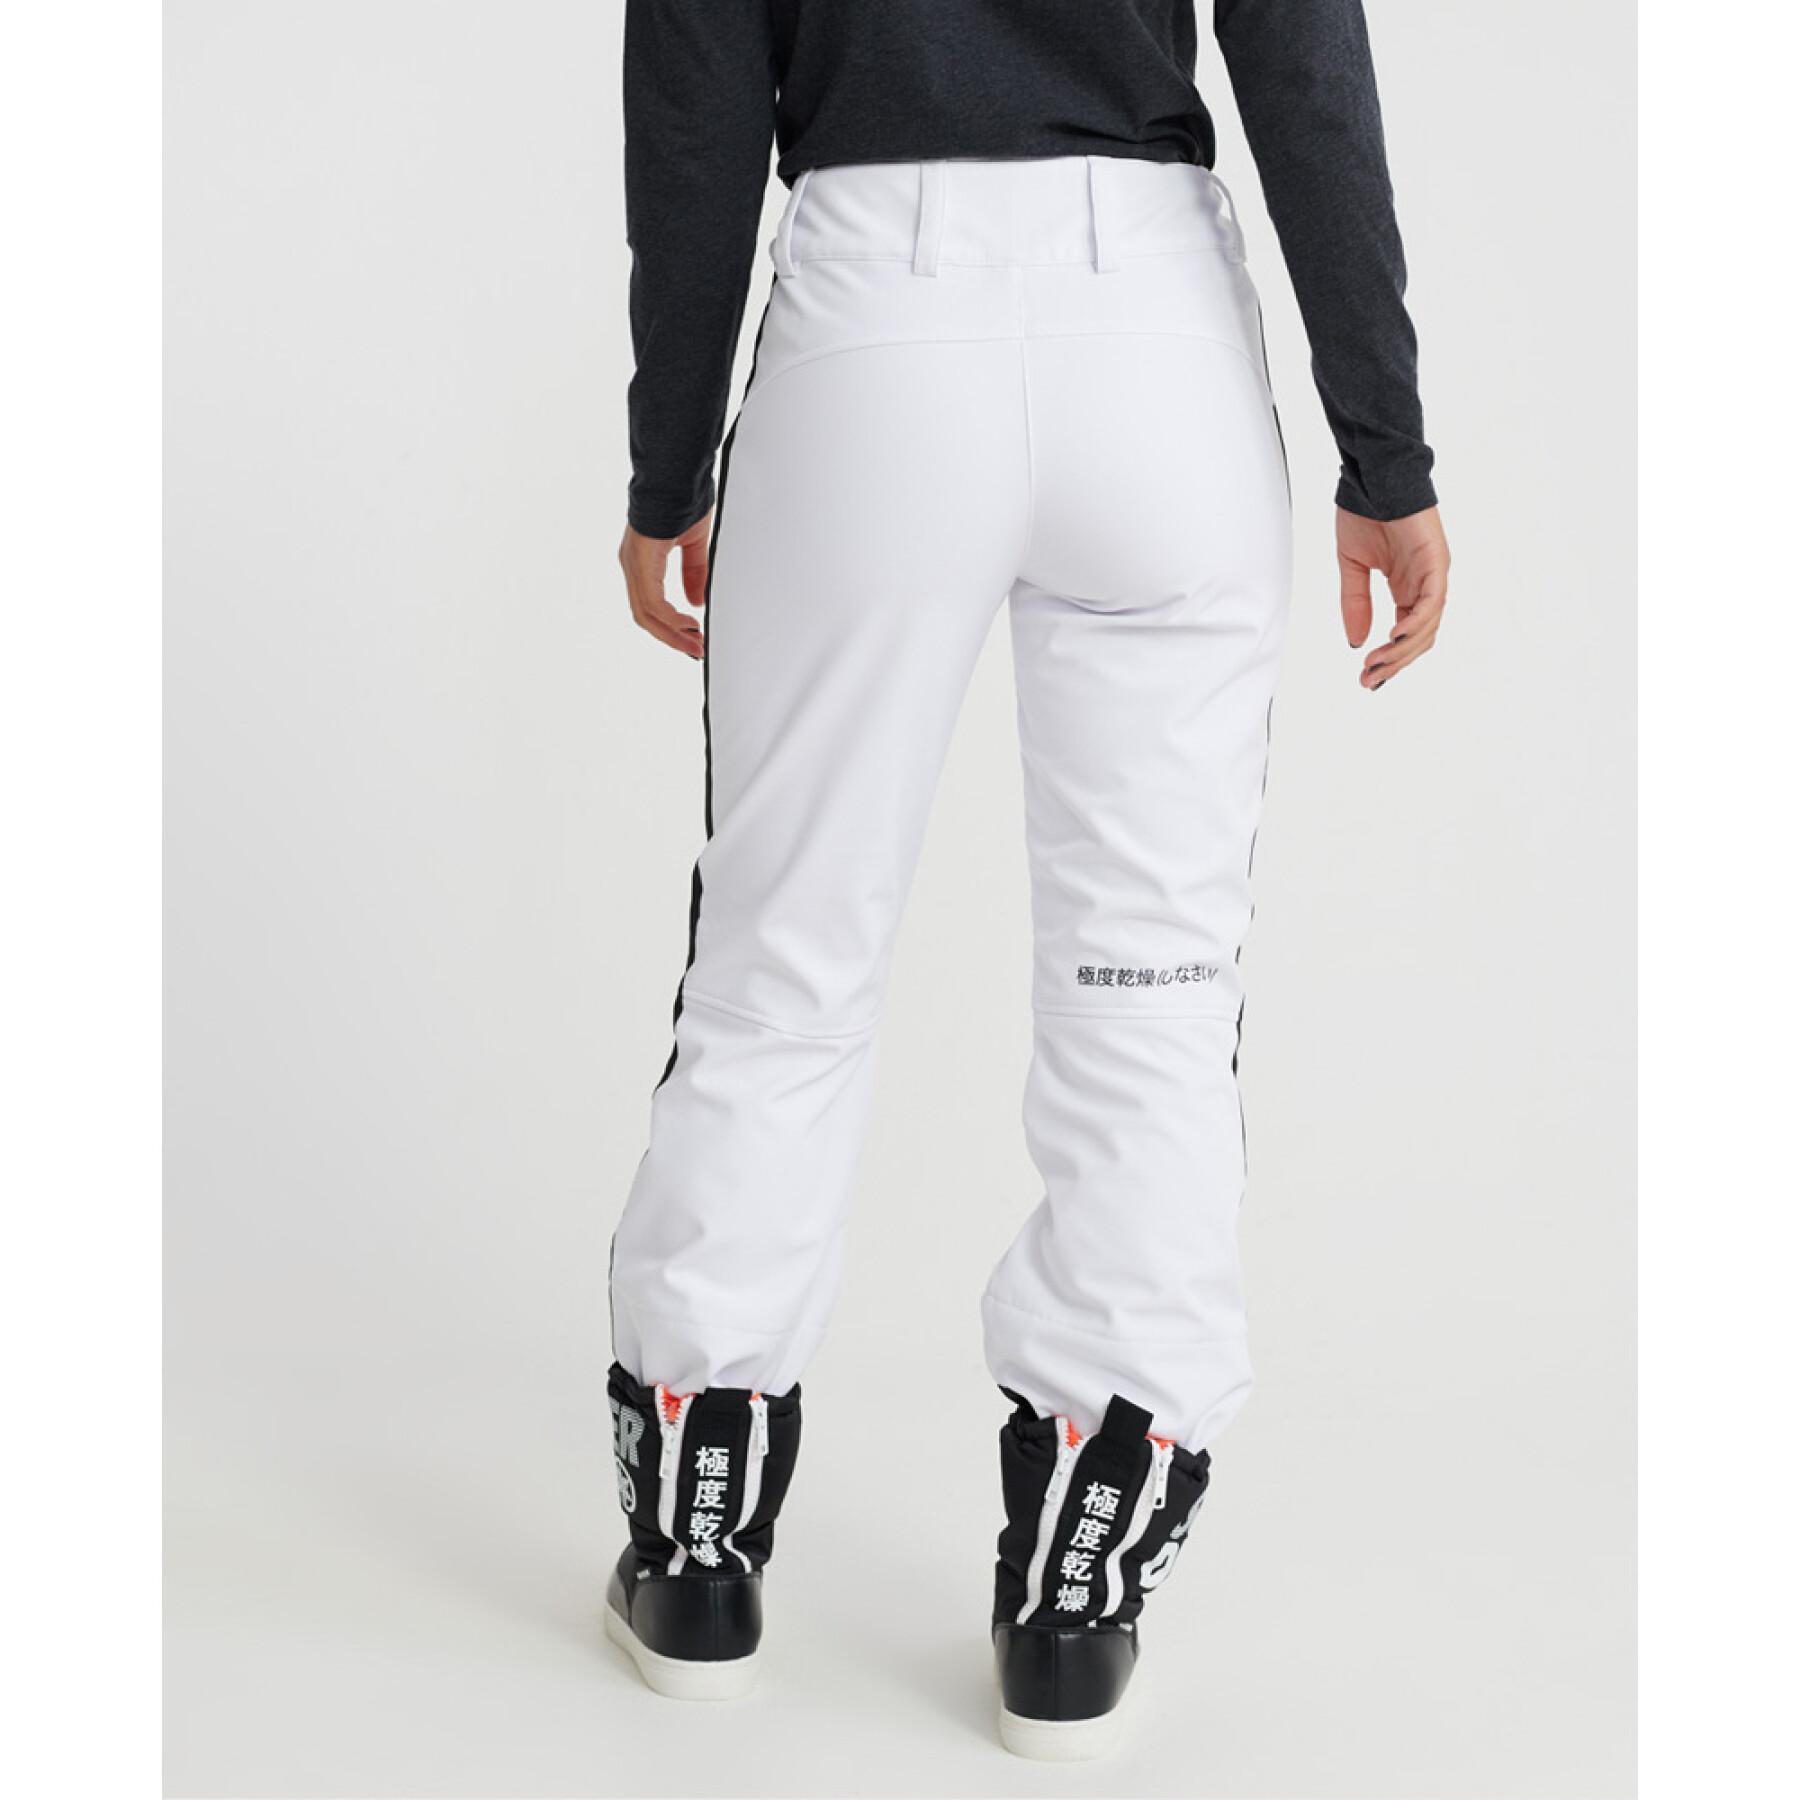 Women's trousers Superdry Ski Carve